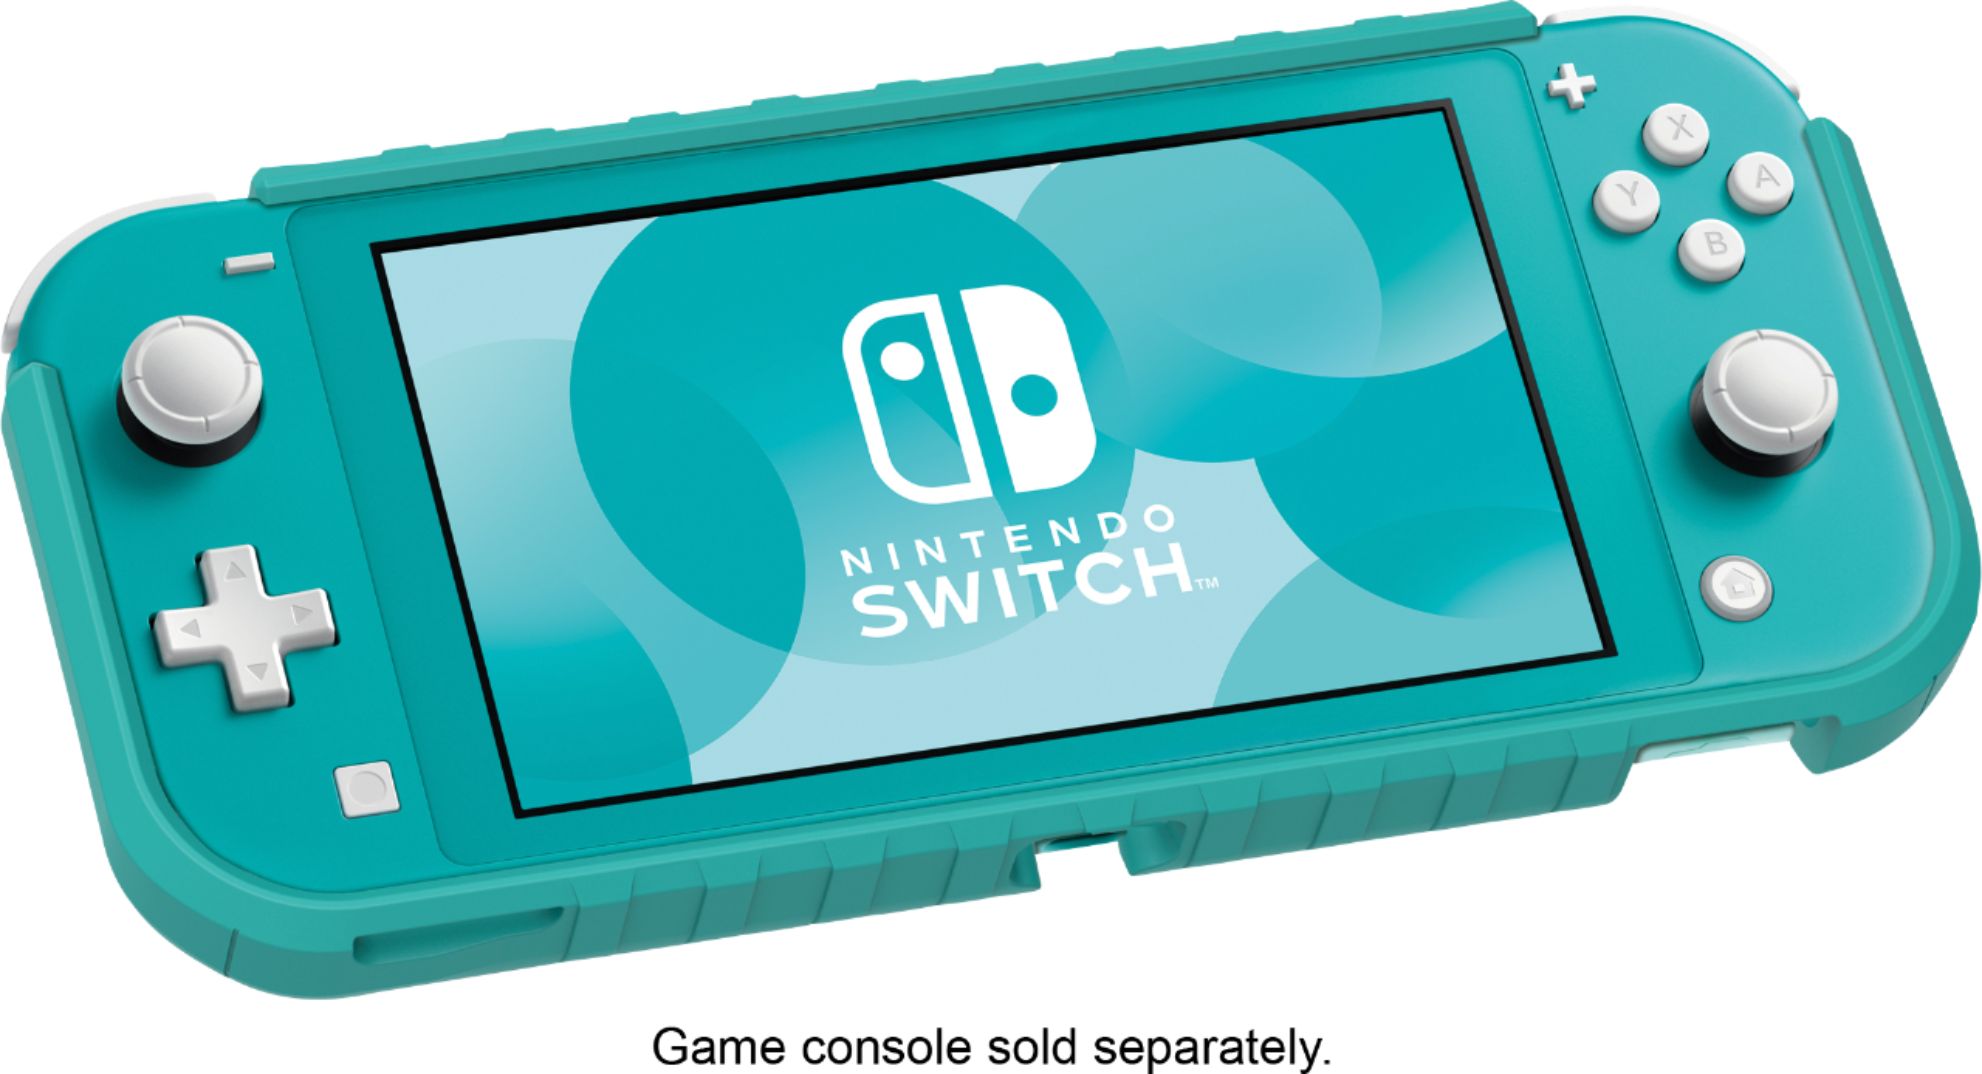 Console portable Nintendo Switch Lite • Turquoise